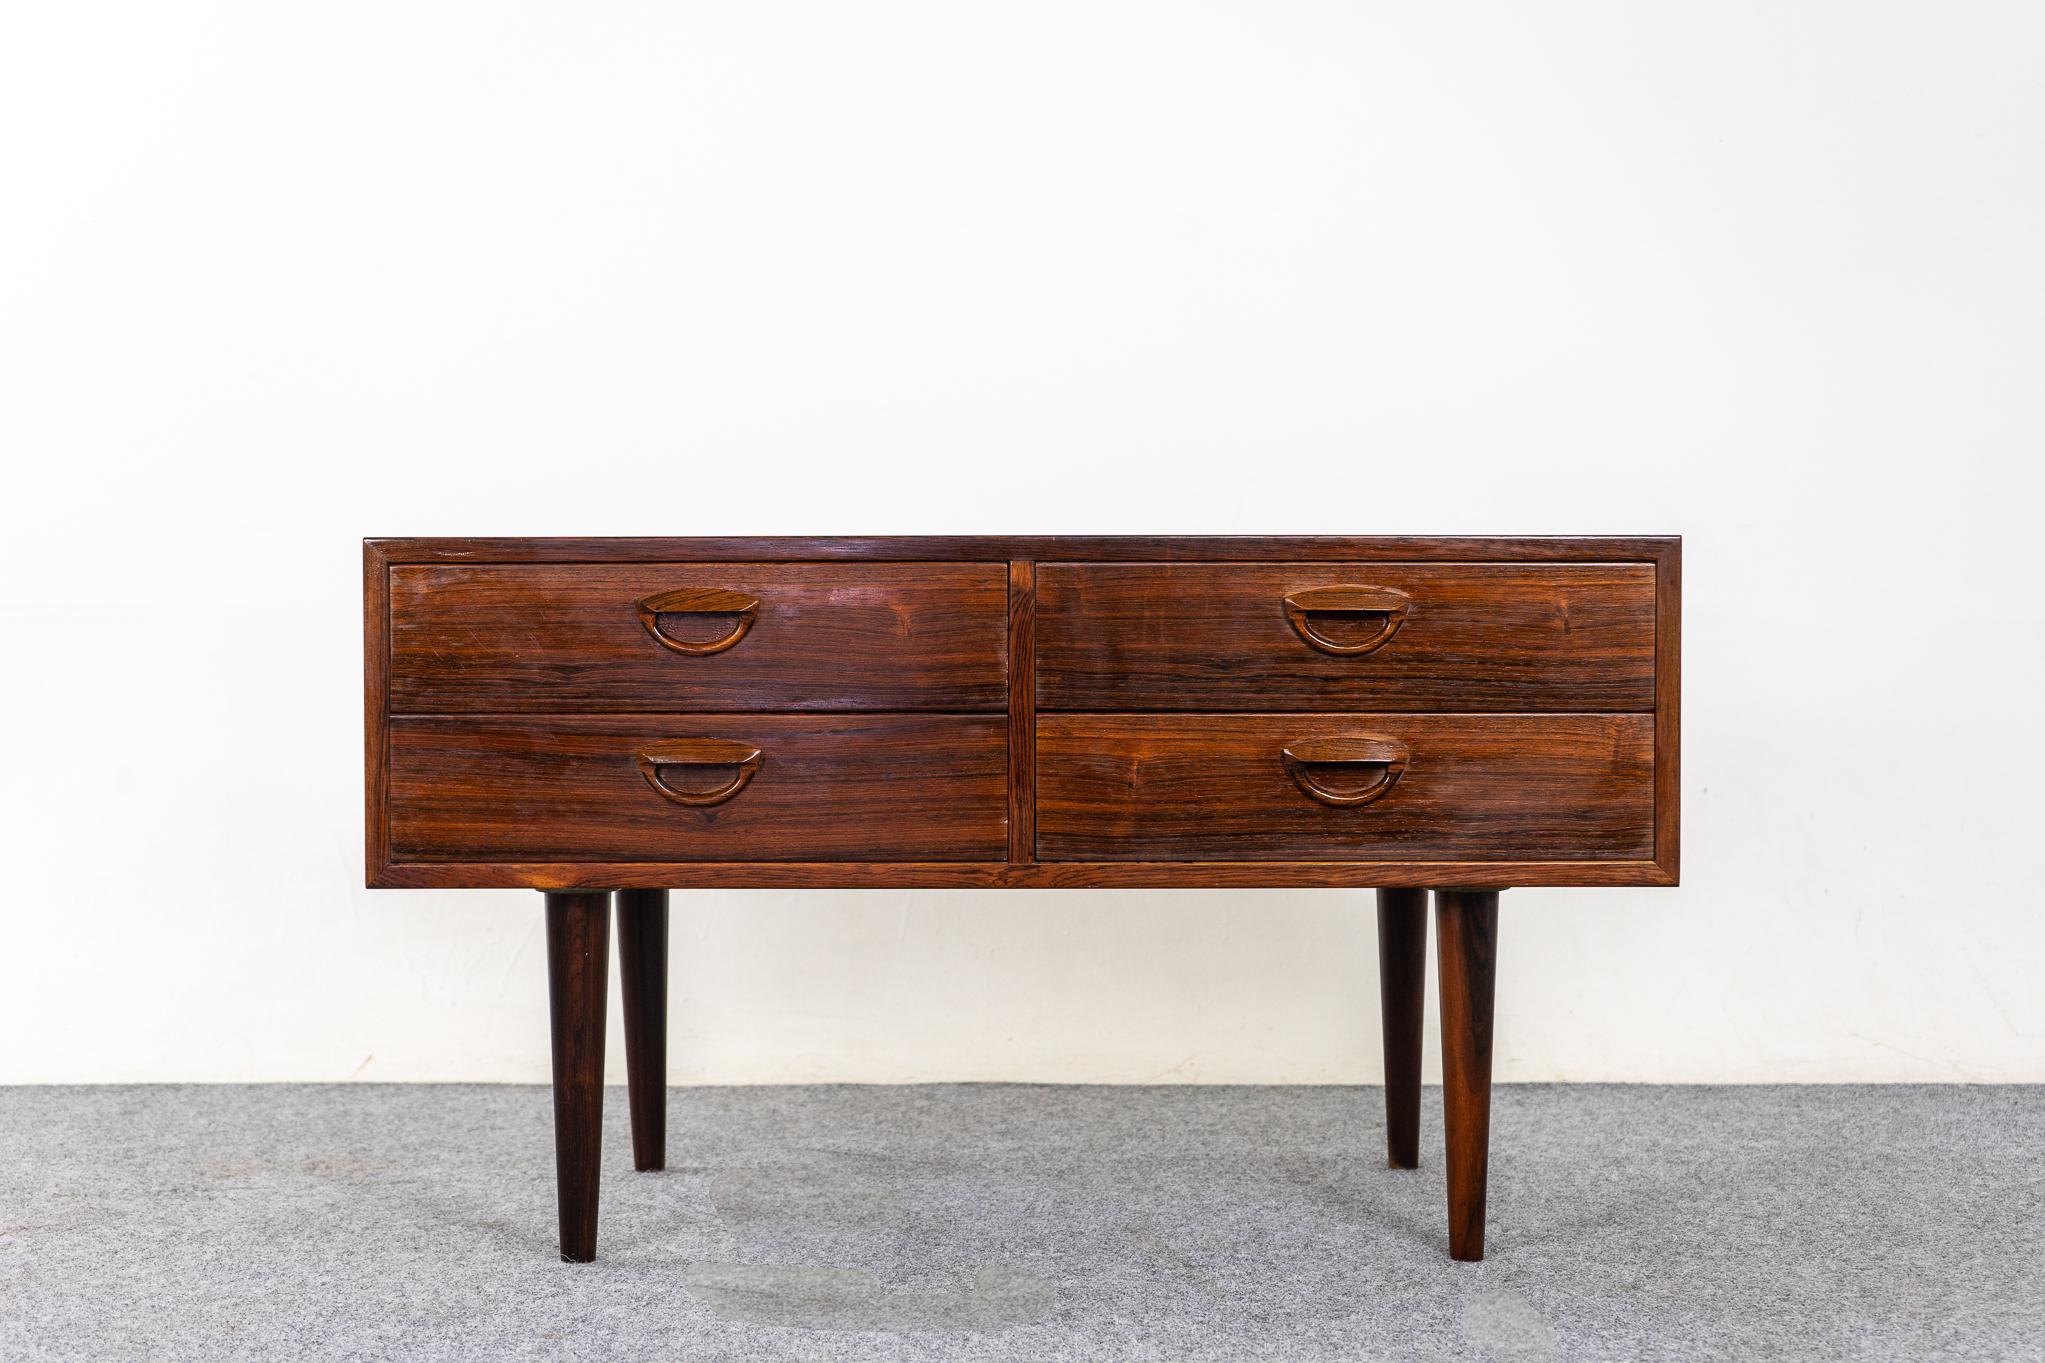 Rosewood Danish modern bedside by Kai Kristiansen, circa 1960's. Beautifully veneered case rests on slender, tapered legs. 4 slim drawers with dovetail construction. Add the extra storage you've always needed!

Please inquire for international and